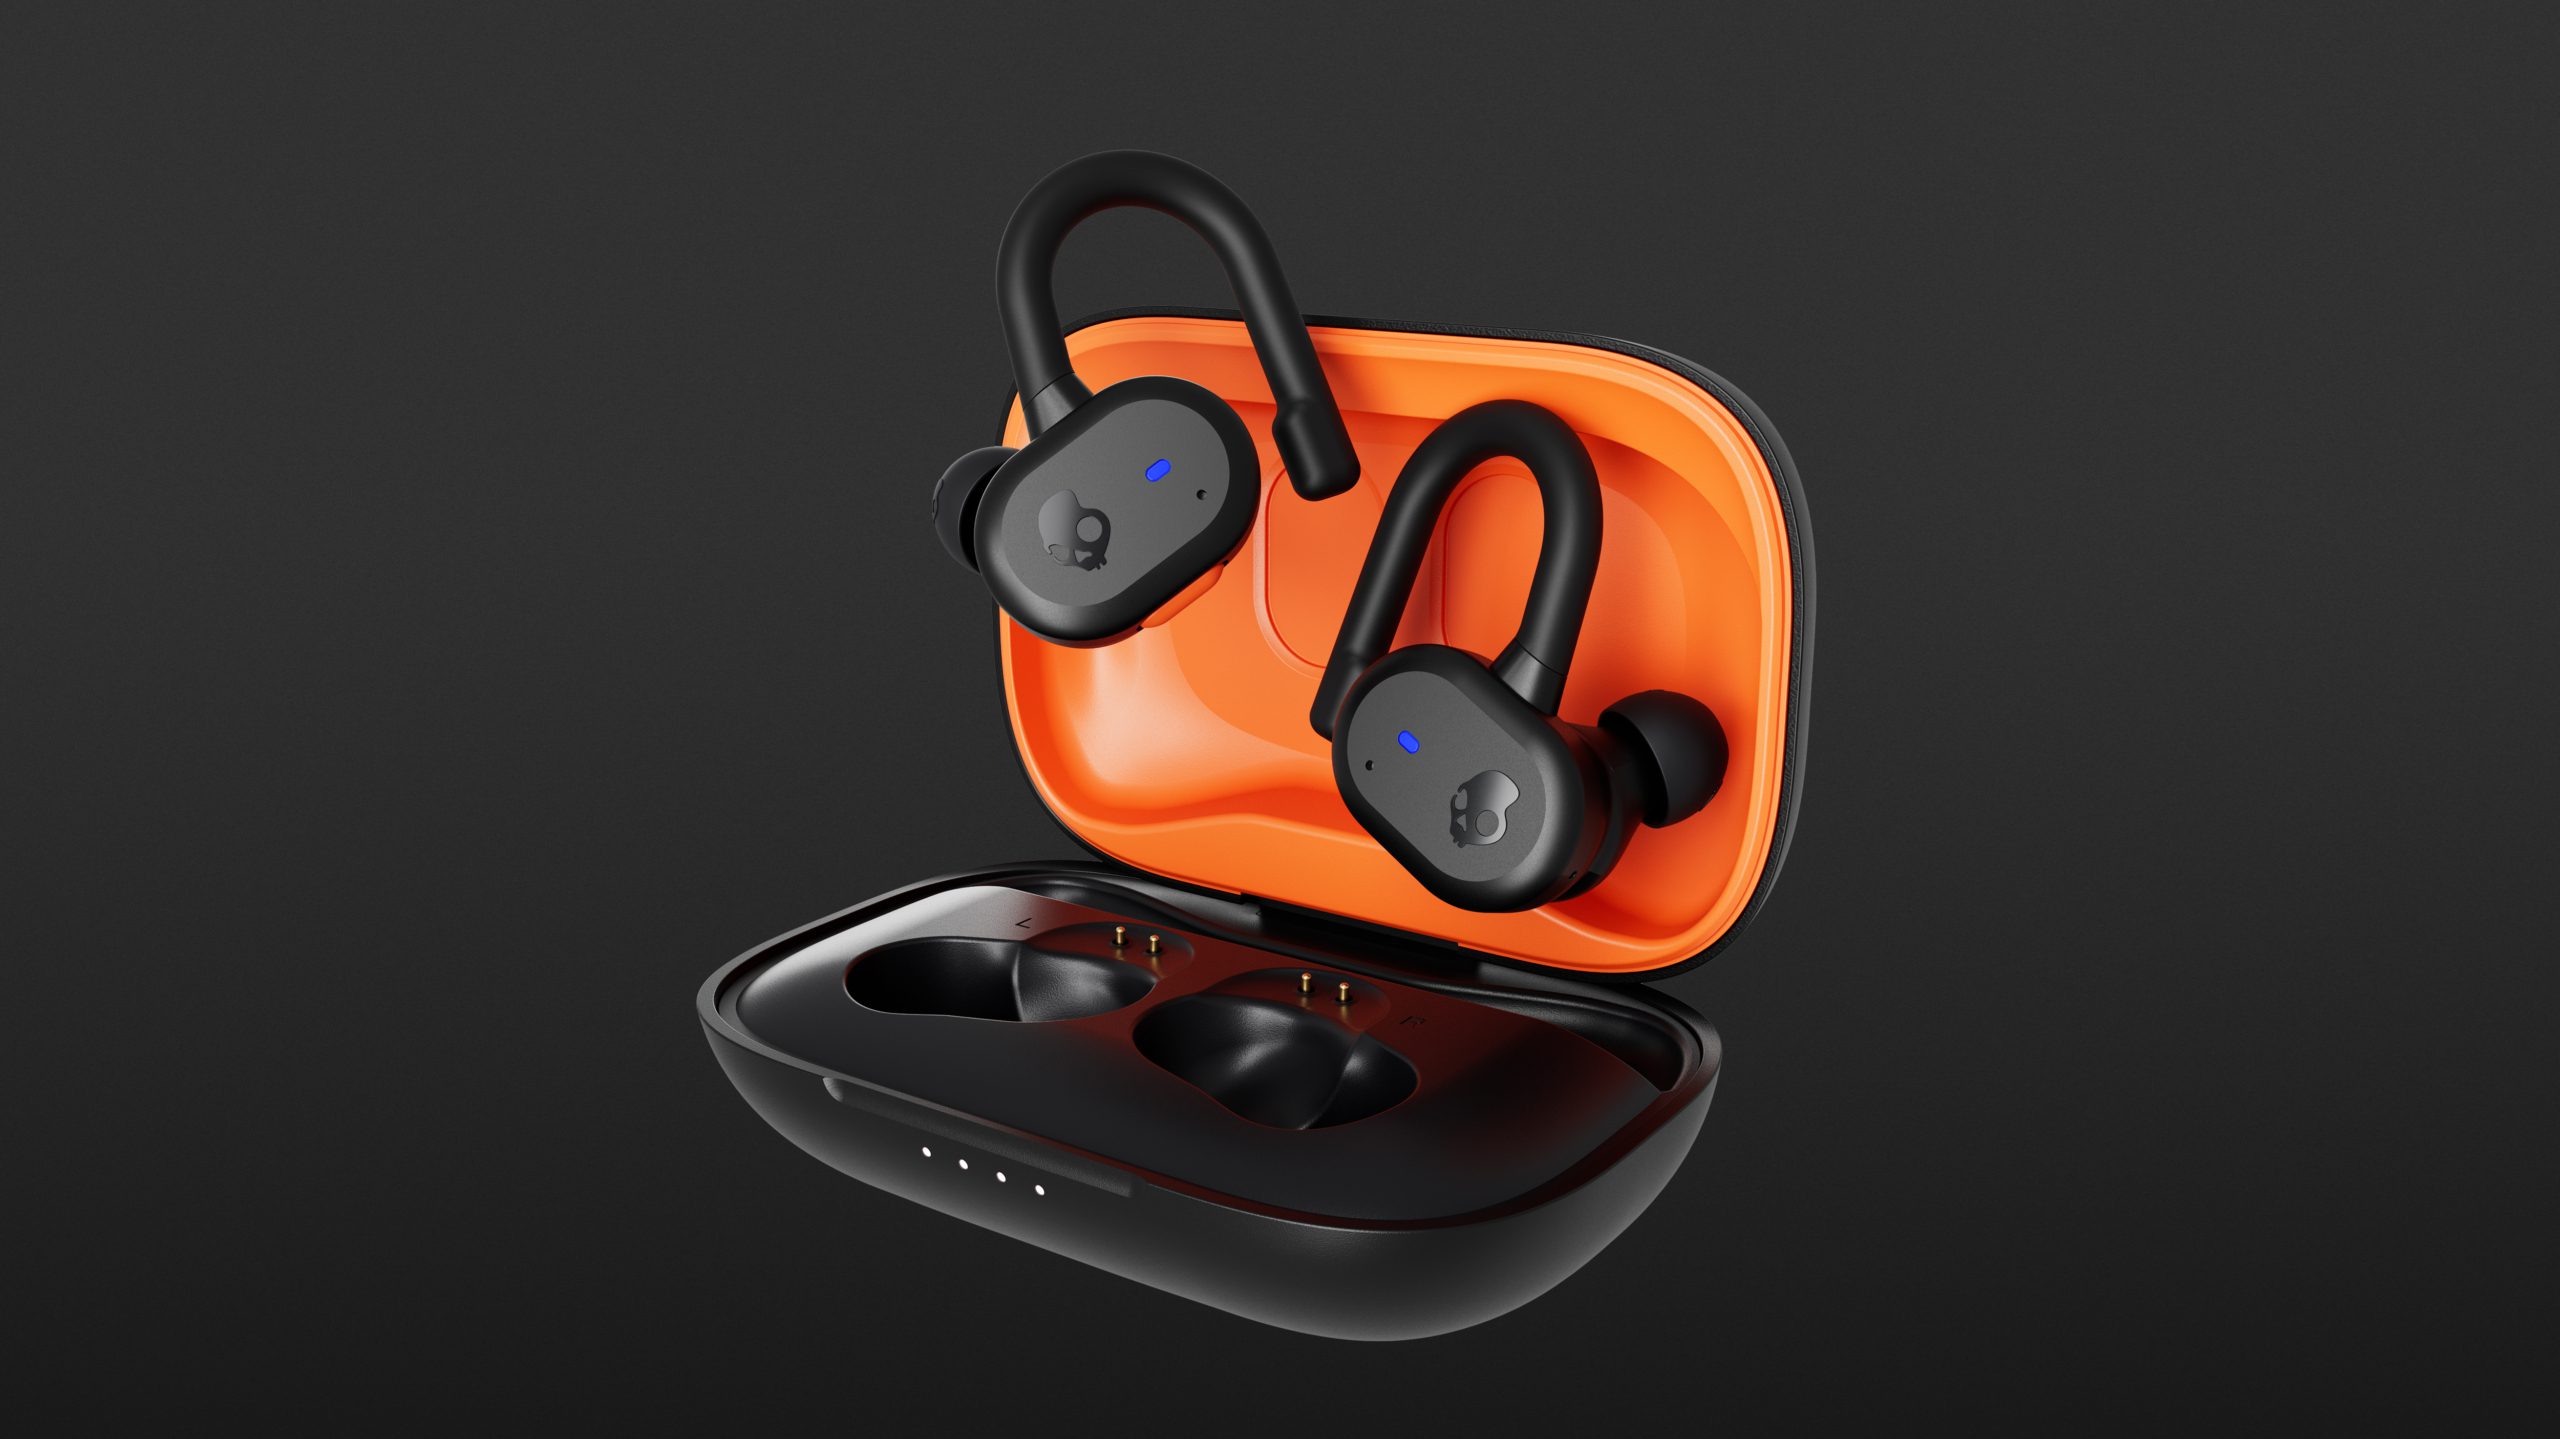 Skullcandy Unveils Skull-iQ Smart Feature Technology To Enable Hands-Free  Audio Via Simple Voice Commands - The Economic Times